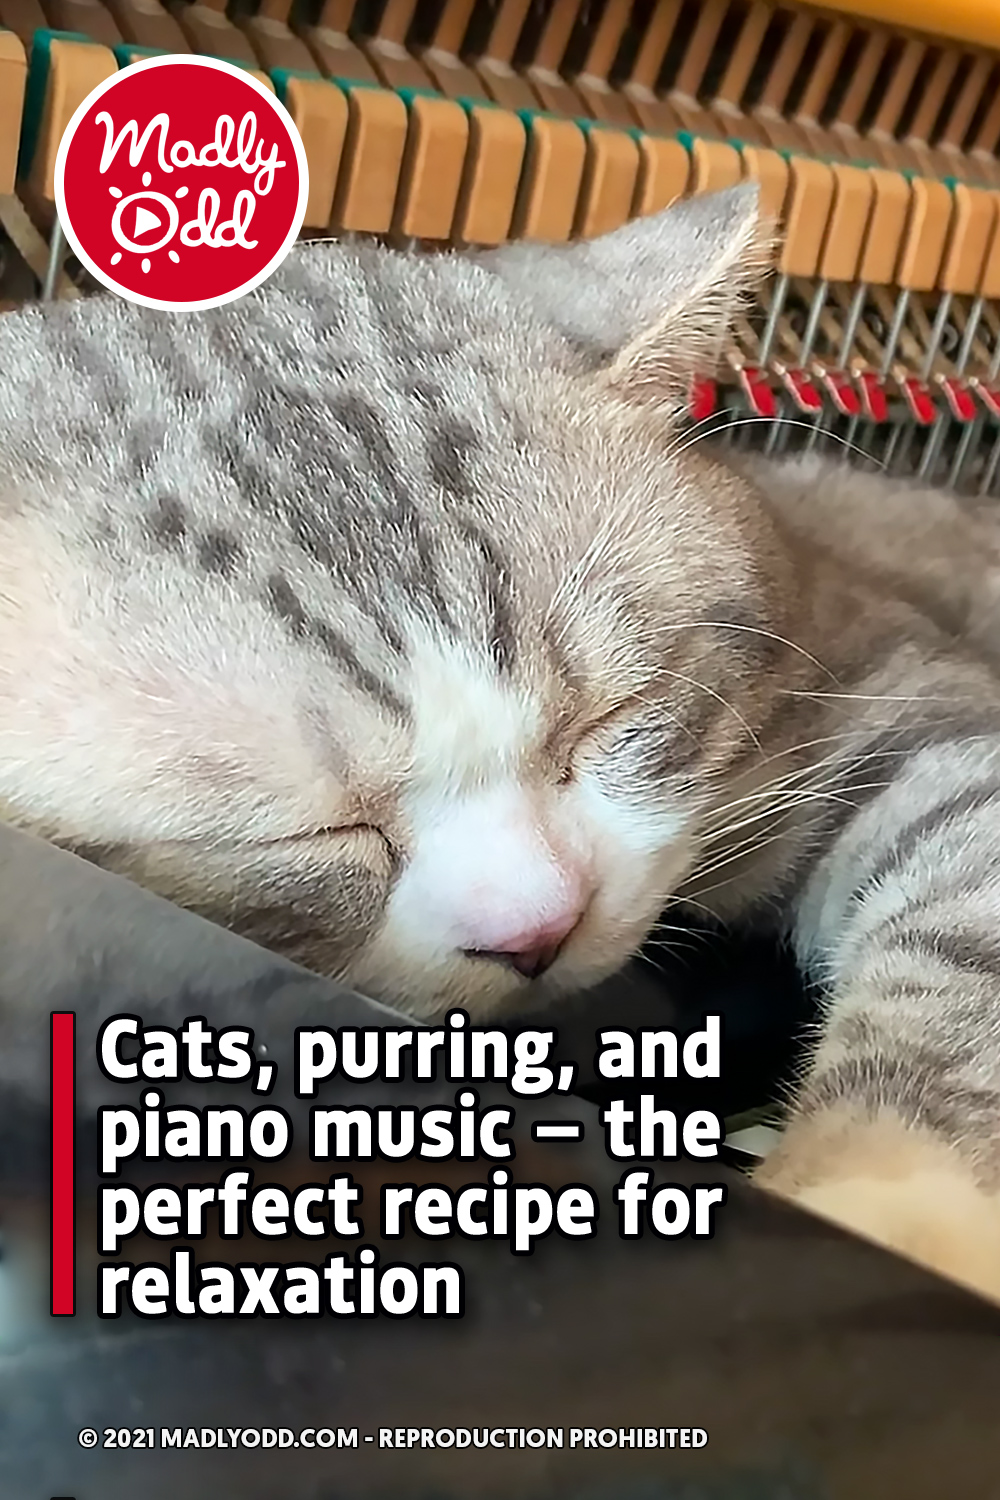 Cats, purring, and piano music — the perfect recipe for relaxation